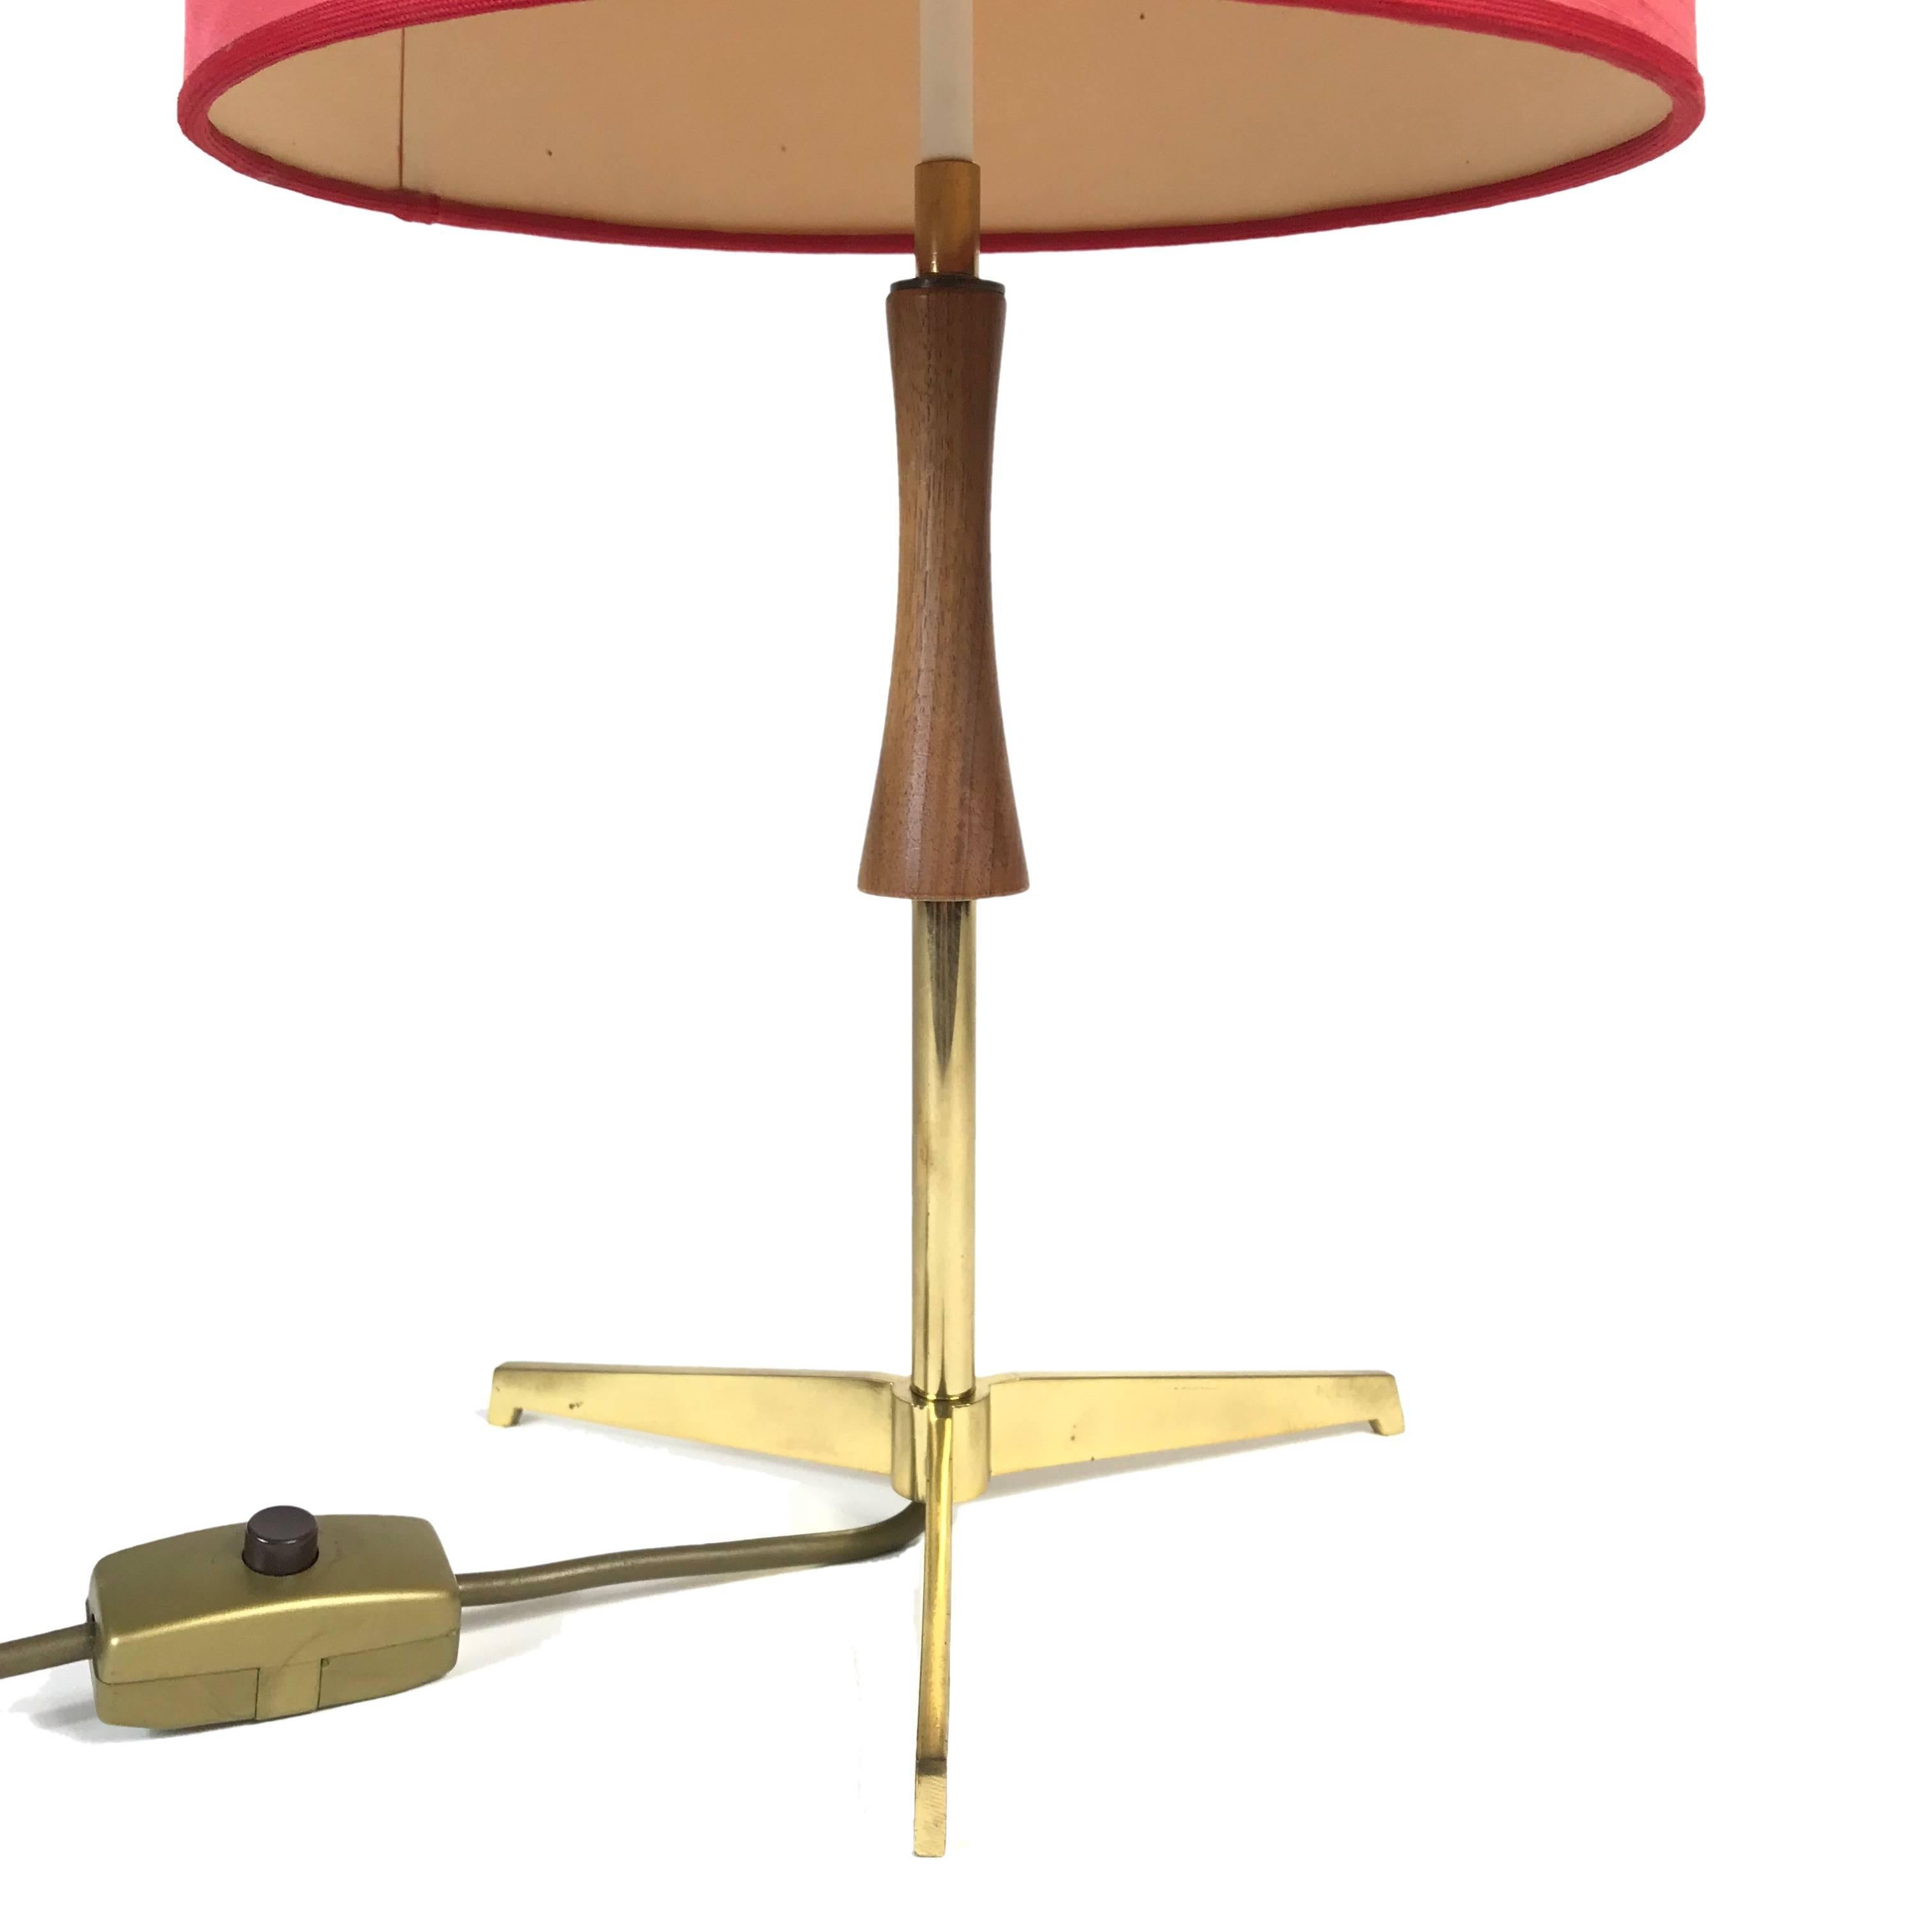 Simple and elegant midcentury table lamp manufactured by J.T. Kalmar in Vienna. The lamp is made of brass with wooden handle and has a polished brass tripod base. The red shade provides a smooth large-area light. The lamp is in excellent condition